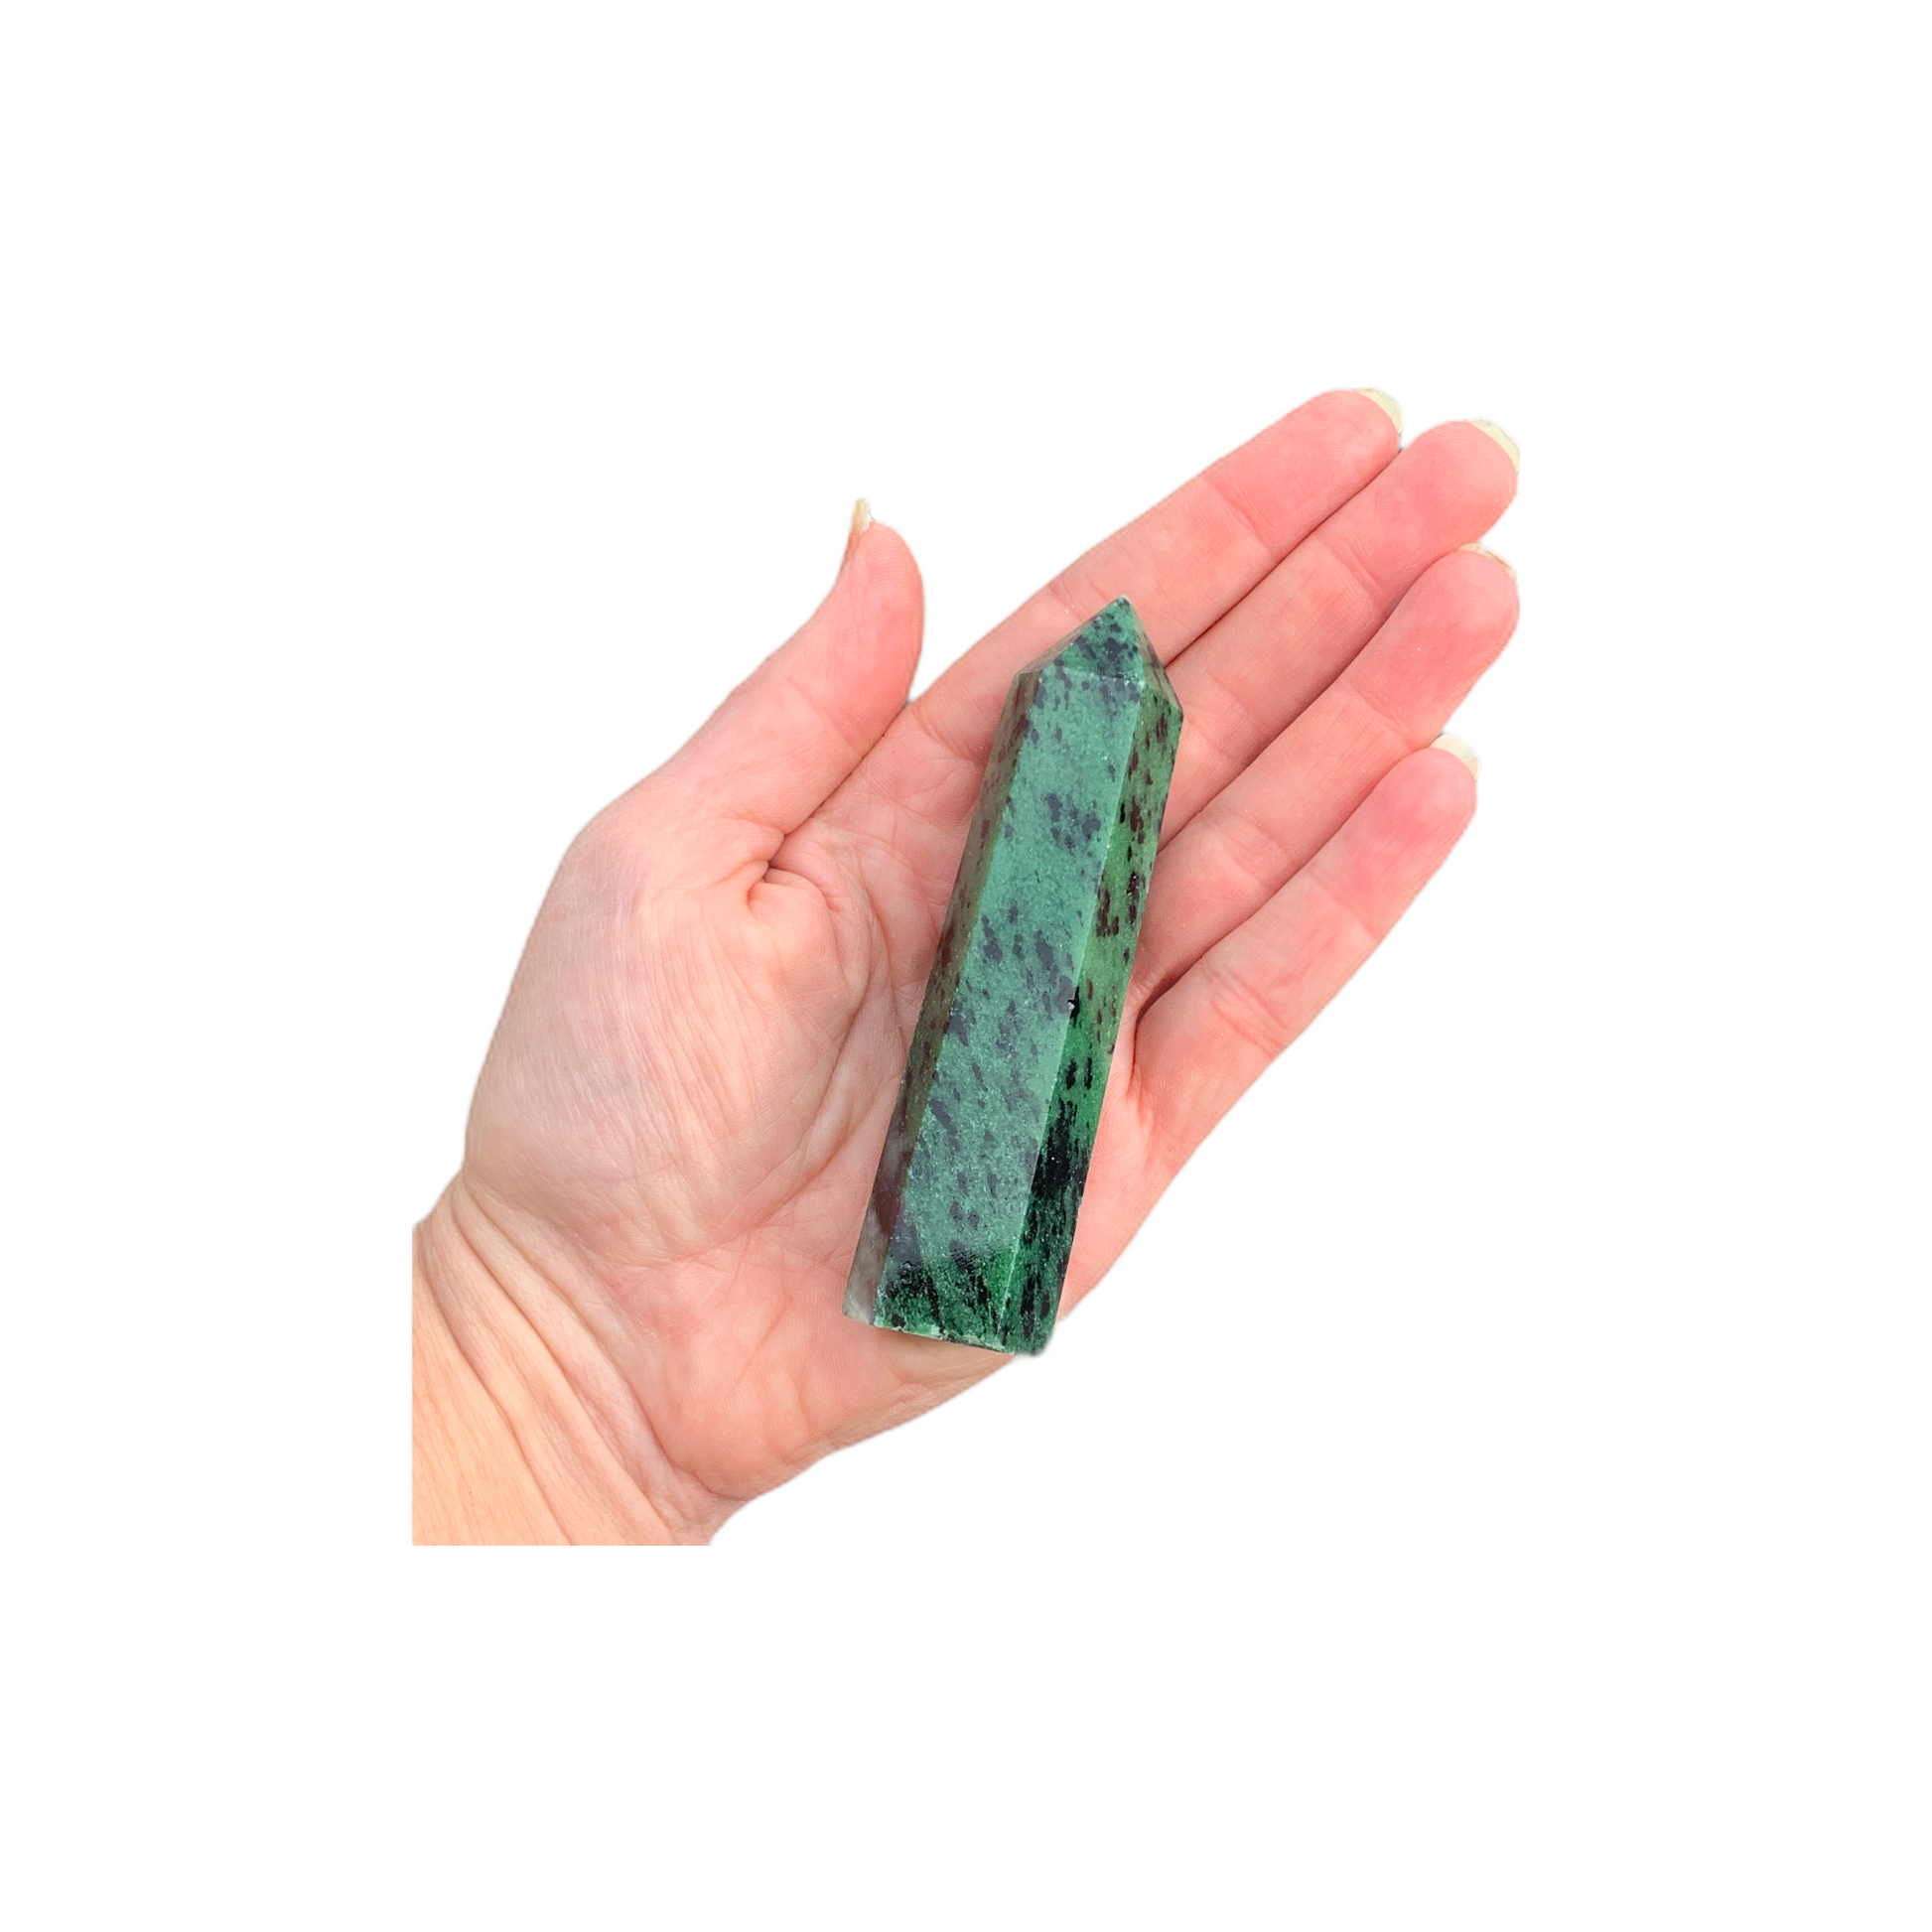 Stone Point Crystal Tower Ruby Zoisite with Hand for Scale 4 Inches